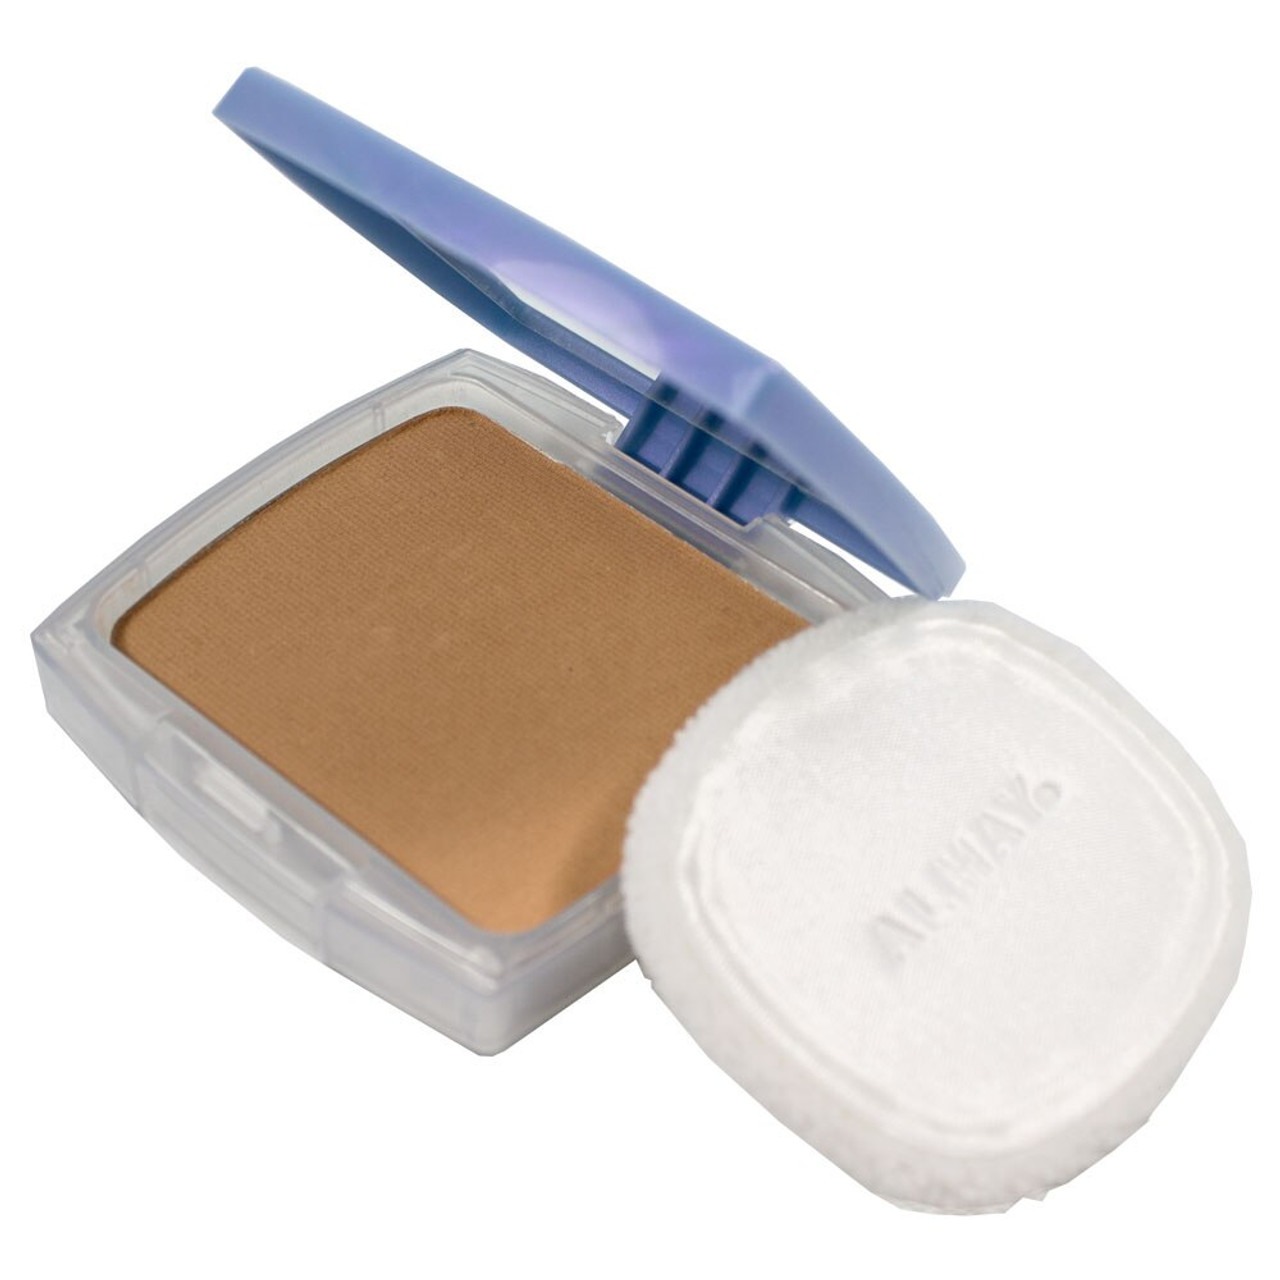 face powder for dry skin